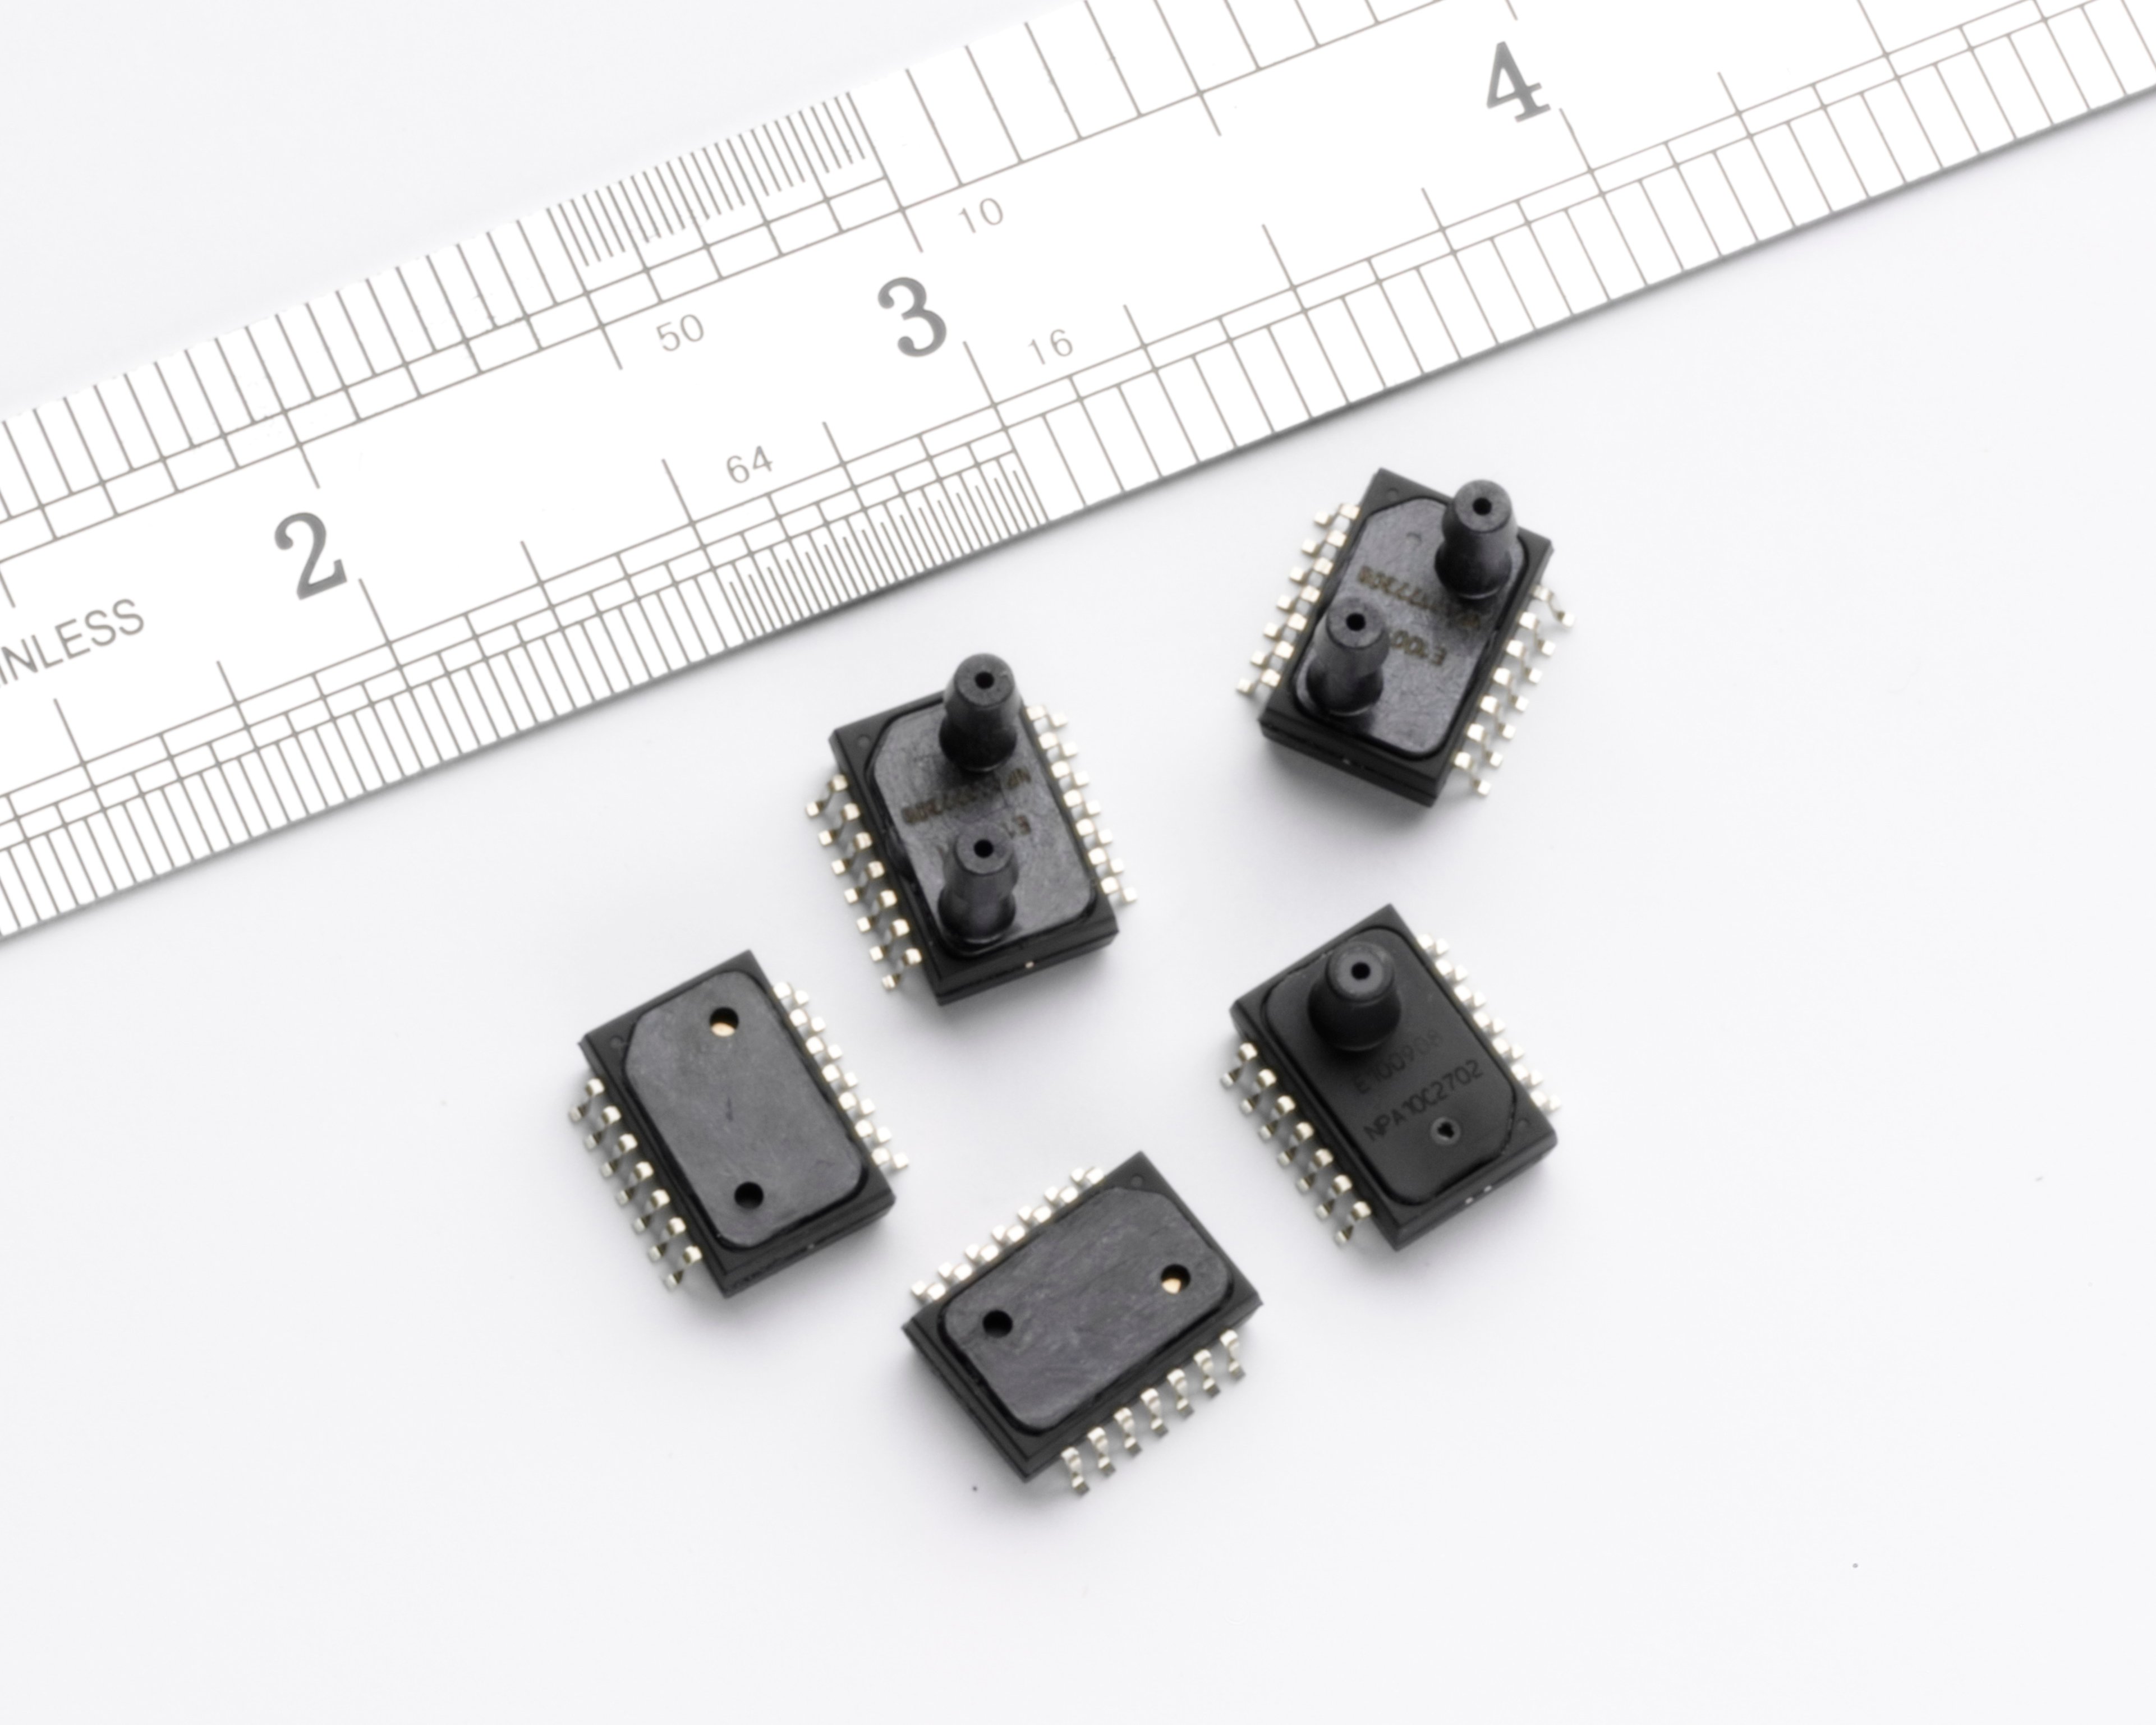 Pressure sensors that are accurate and rugged